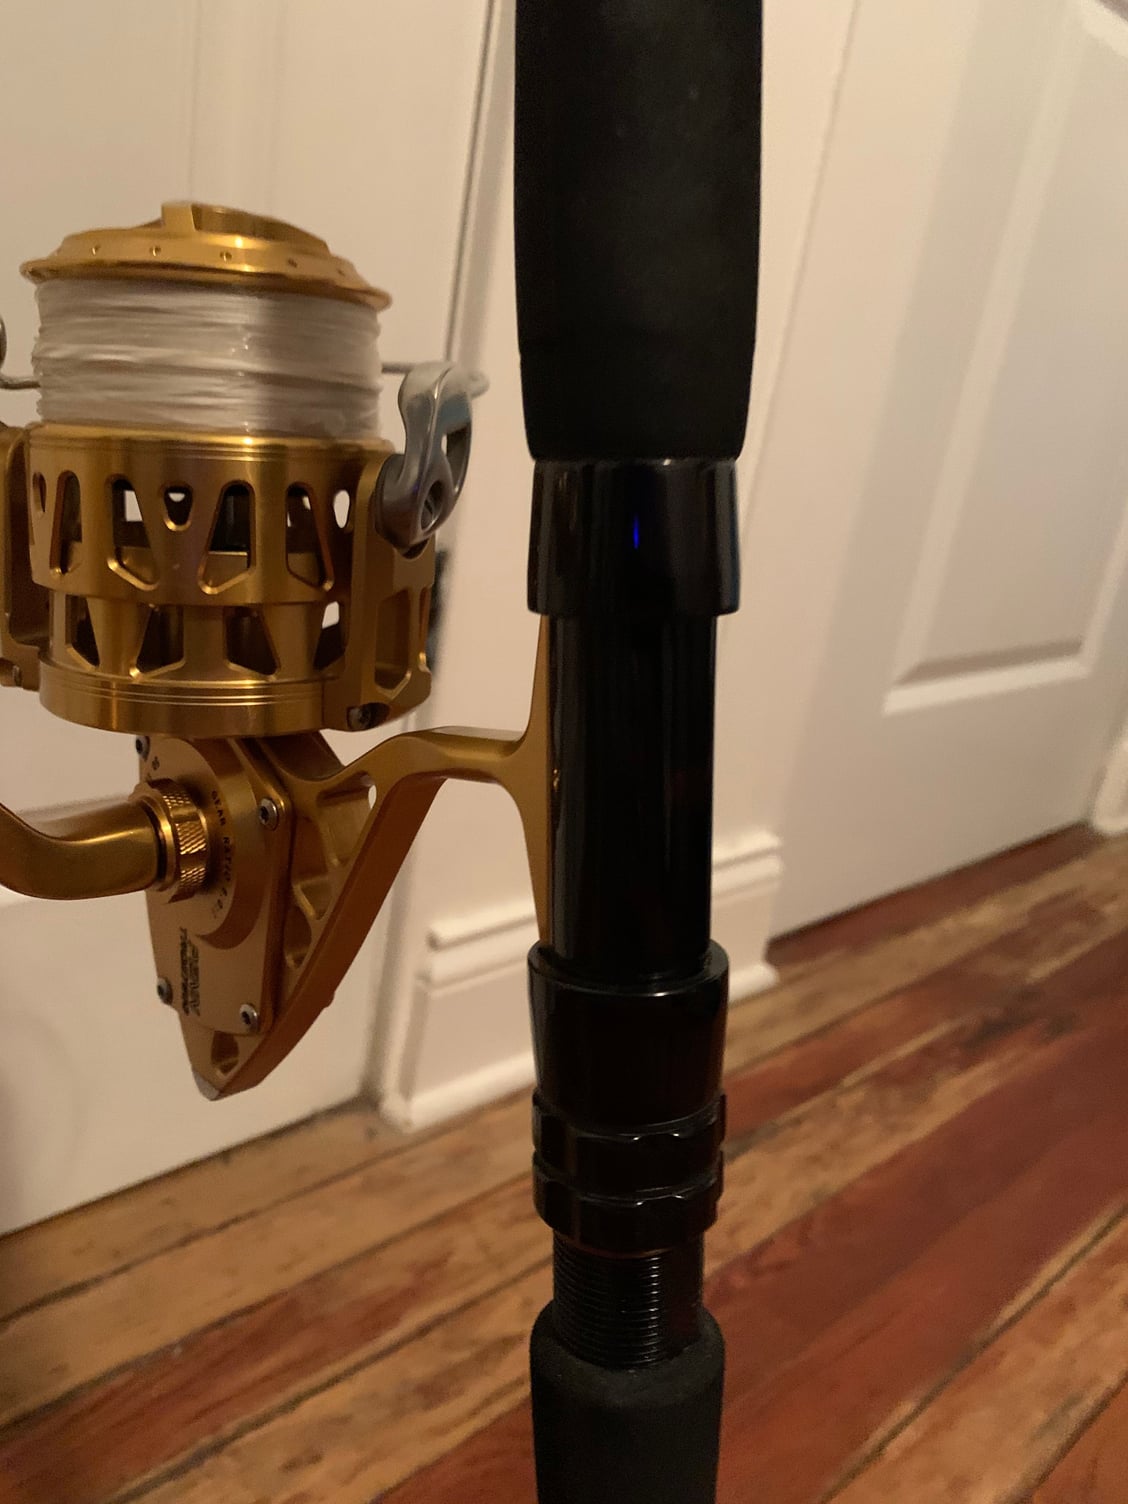 Penn torque 2 7500 spinners gold (2 available) - The Hull Truth - Boating  and Fishing Forum